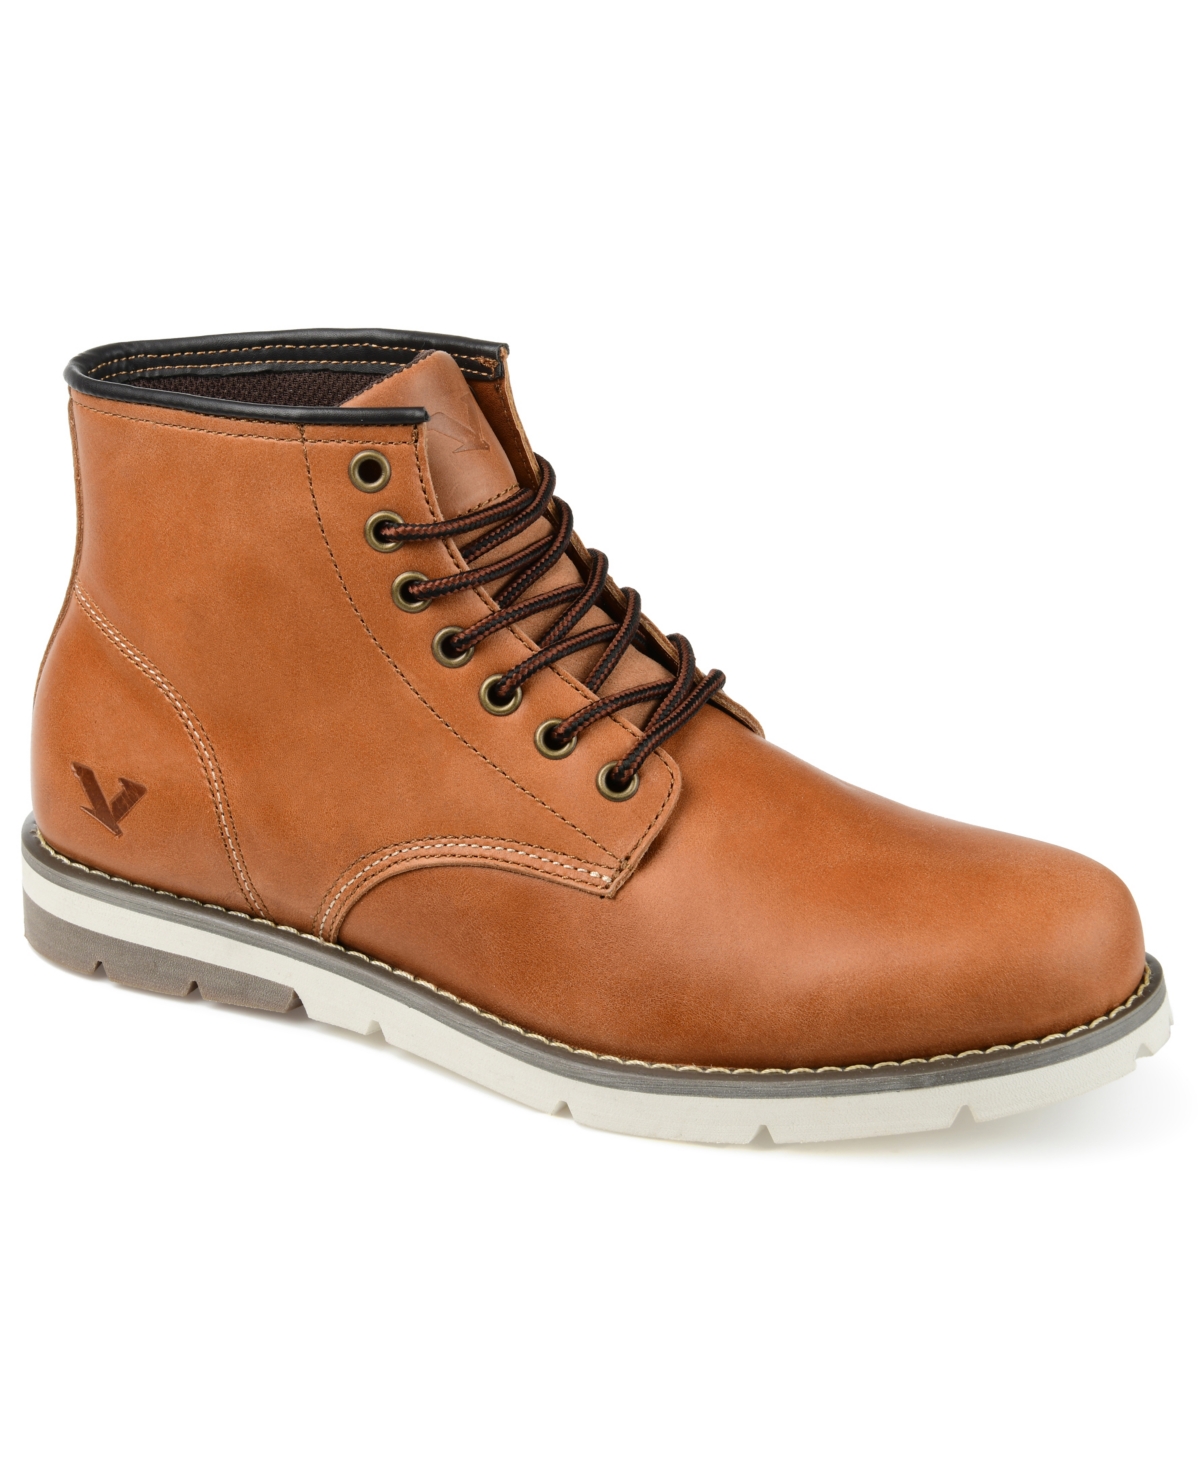 TERRITORY MEN'S AXEL ANKLE BOOTS